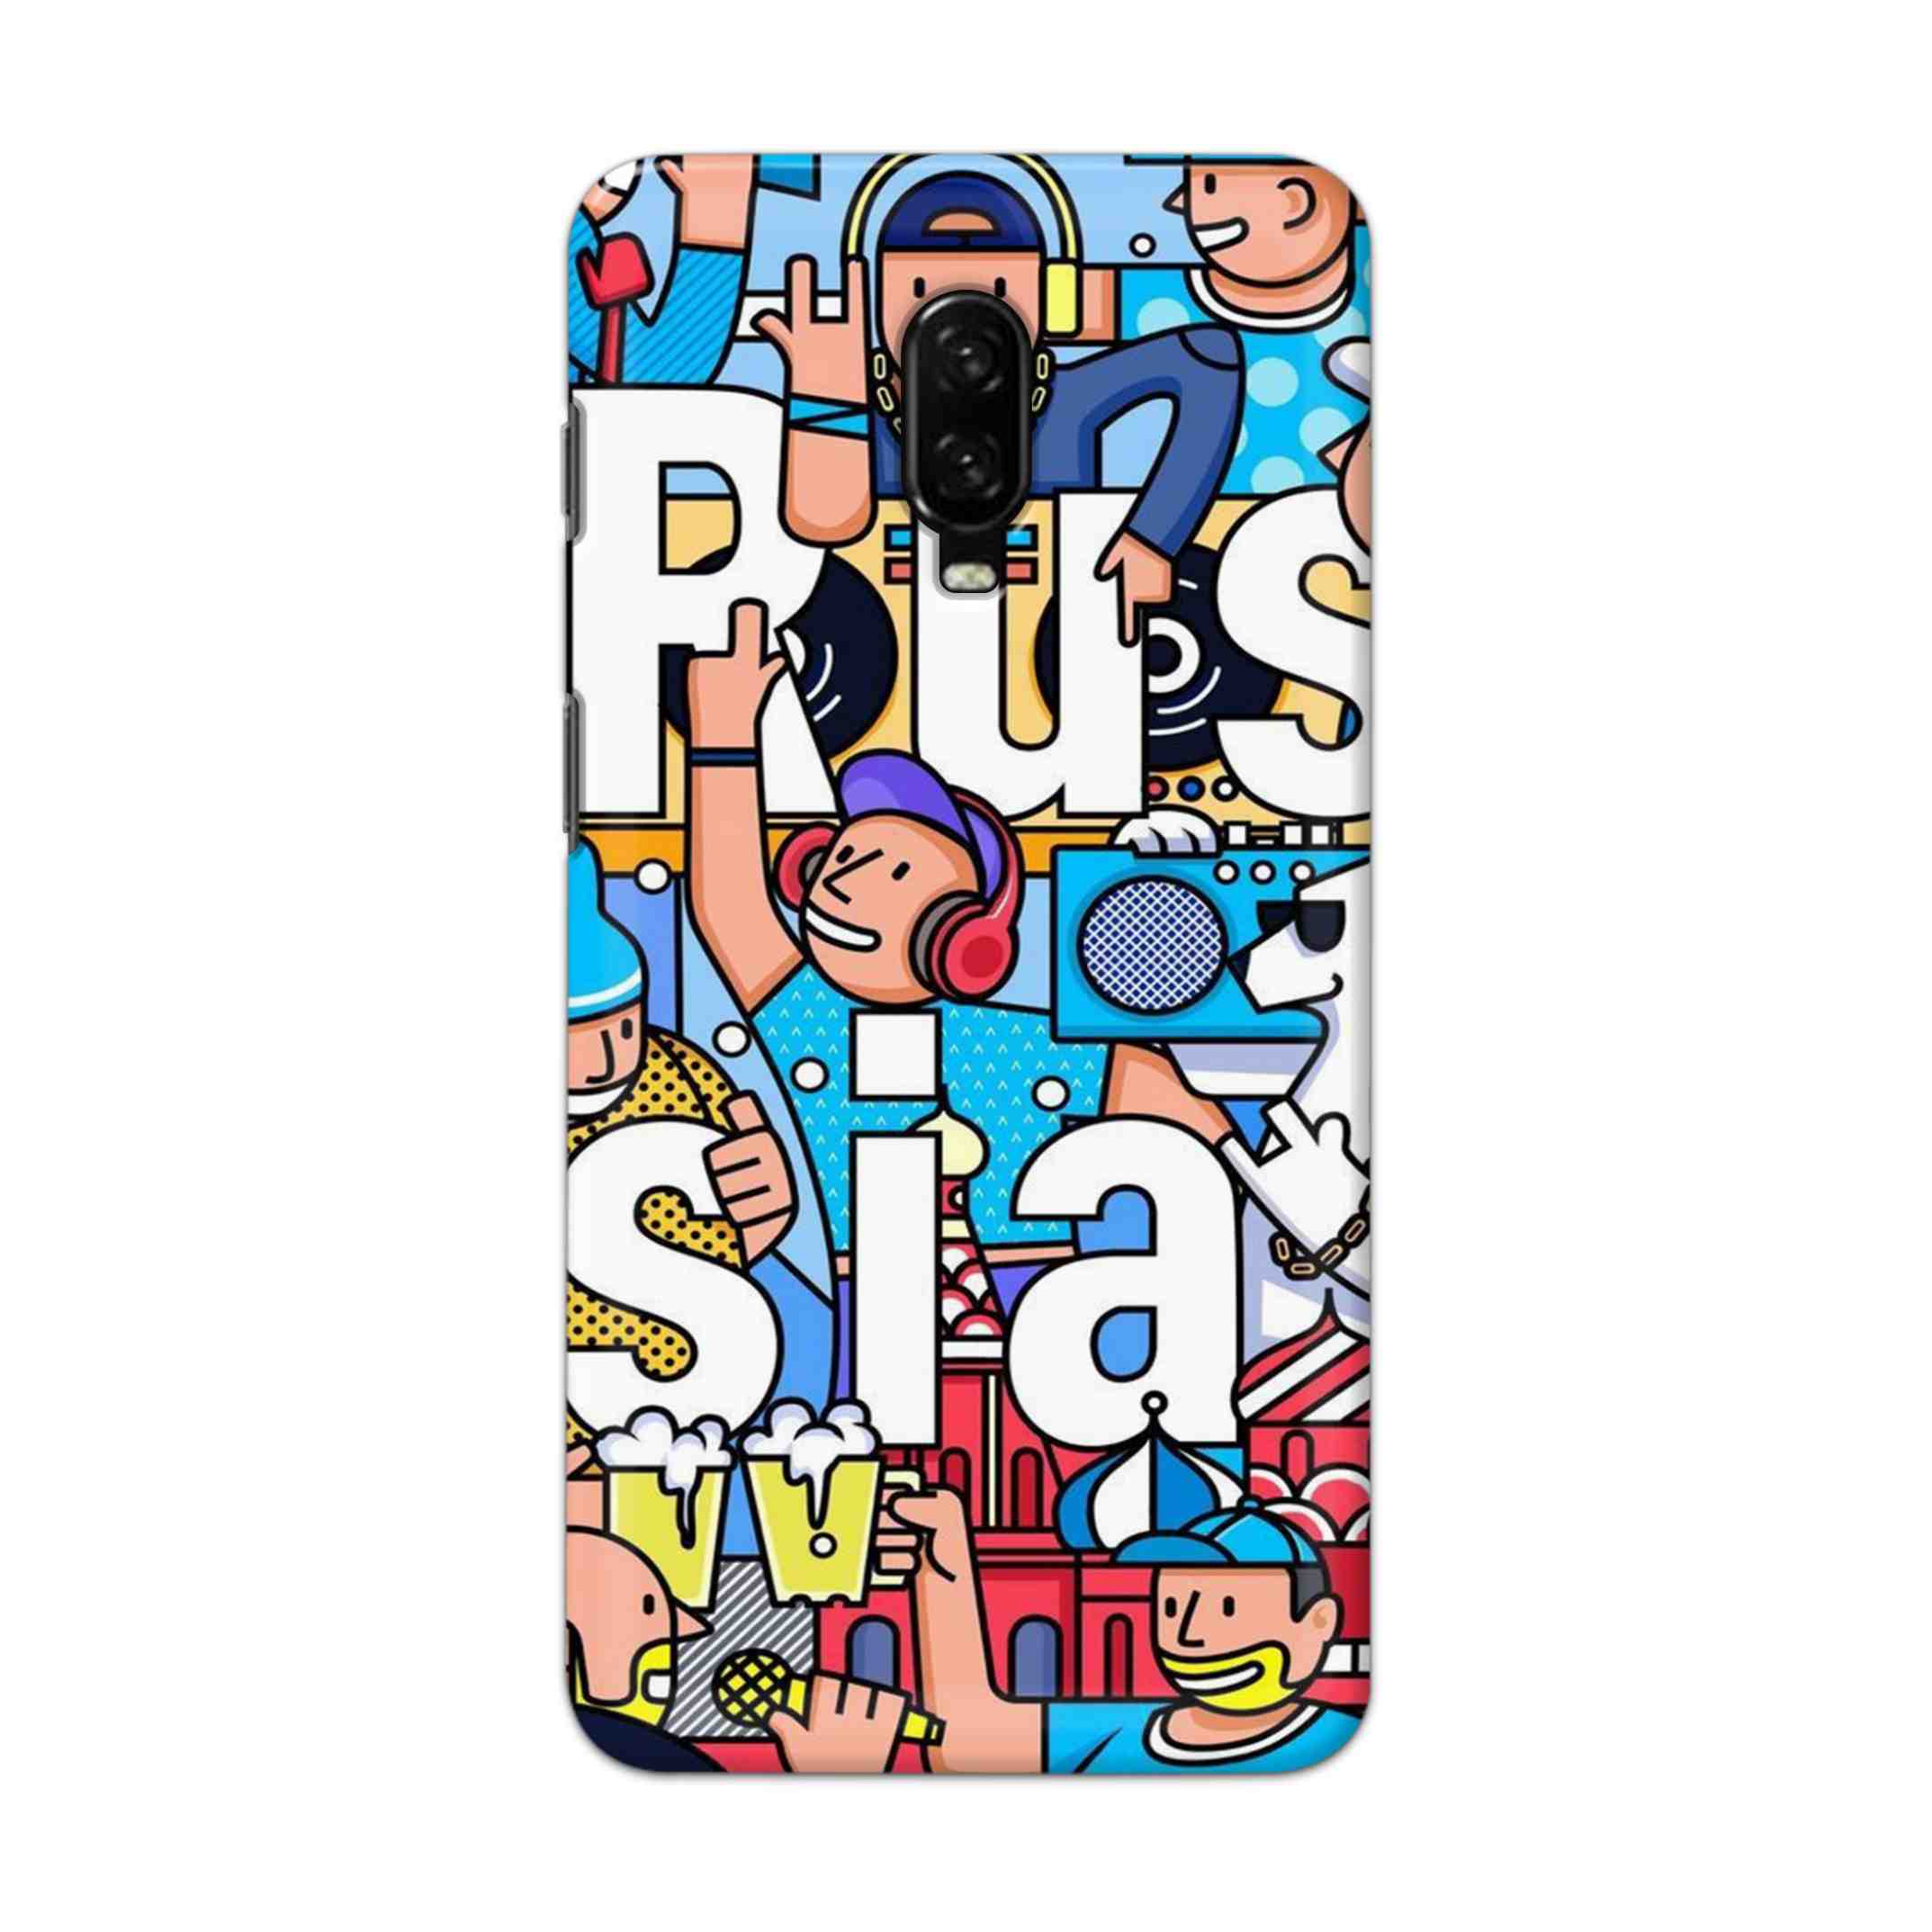 Buy Russia Hard Back Mobile Phone Case Cover For OnePlus 6T Online